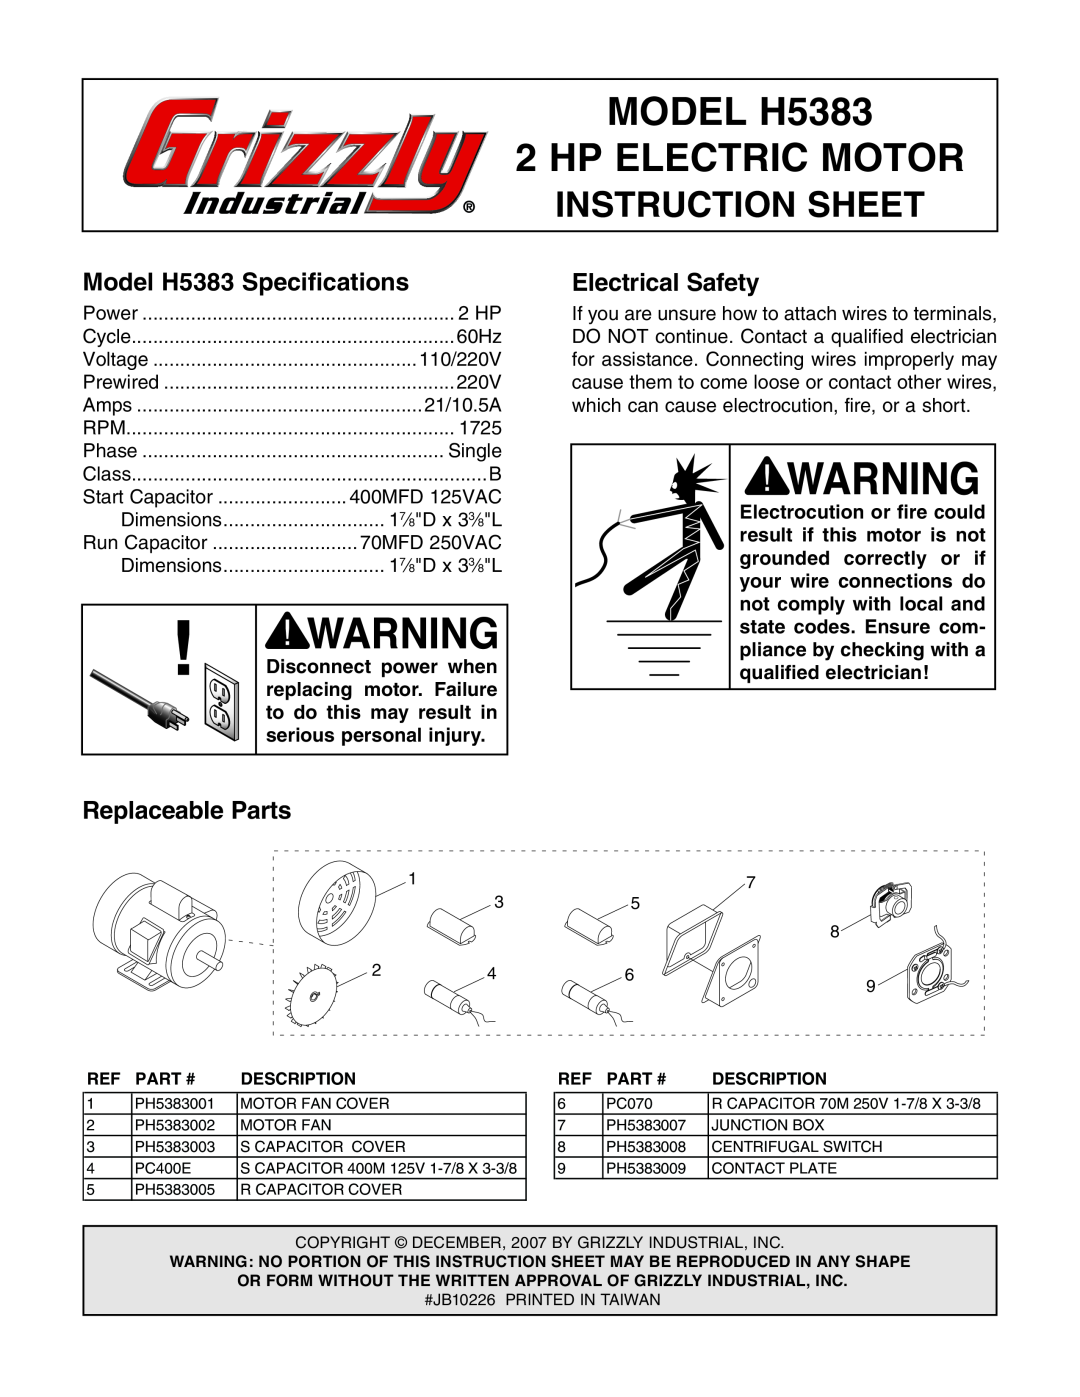 Grizzly instruction sheet MODEL H5383 2 HP ELECTRIC MOTOR, Instruction Sheet, Model H5383 Specifications 